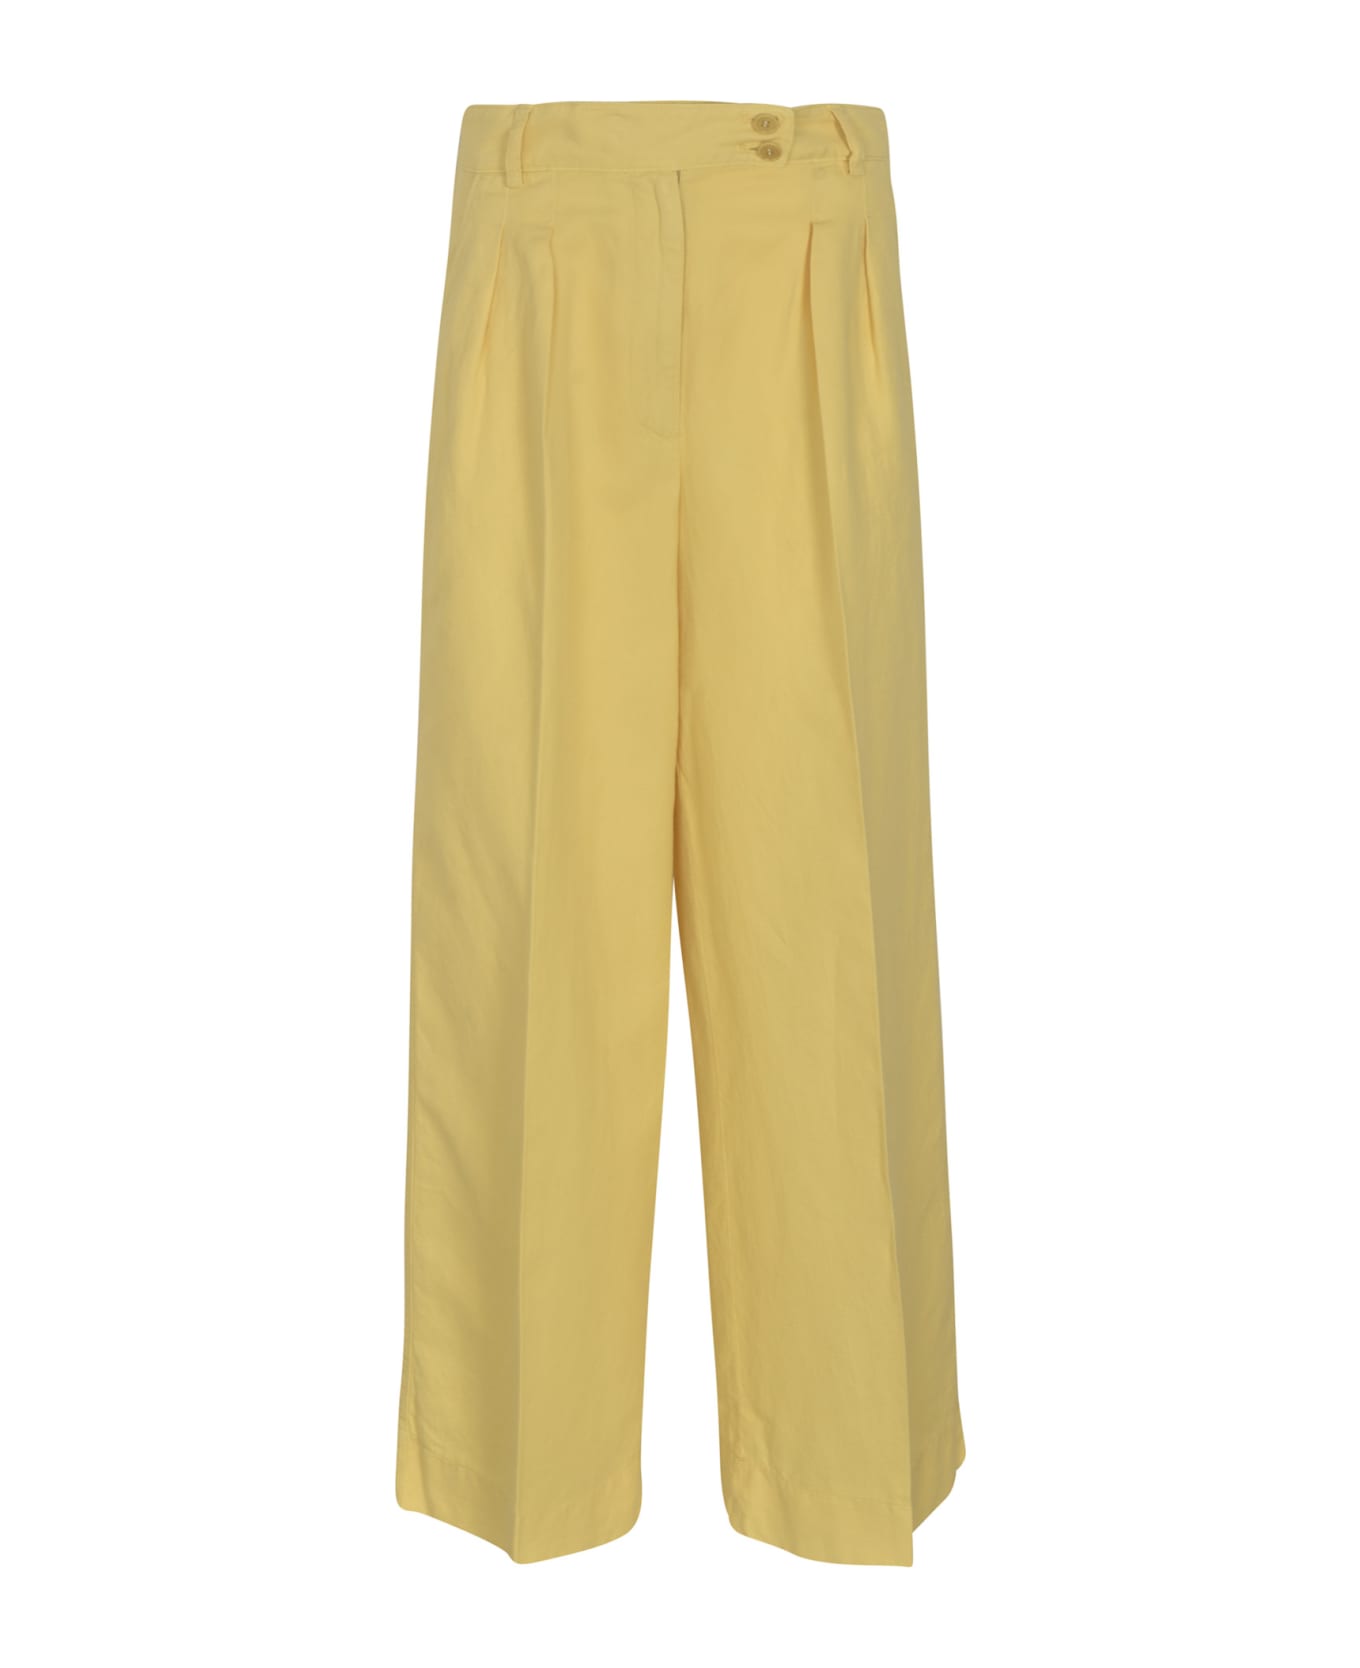 Aspesi Ginger Linen And Cotton Palazzo Trousers - Yellow ボトムス